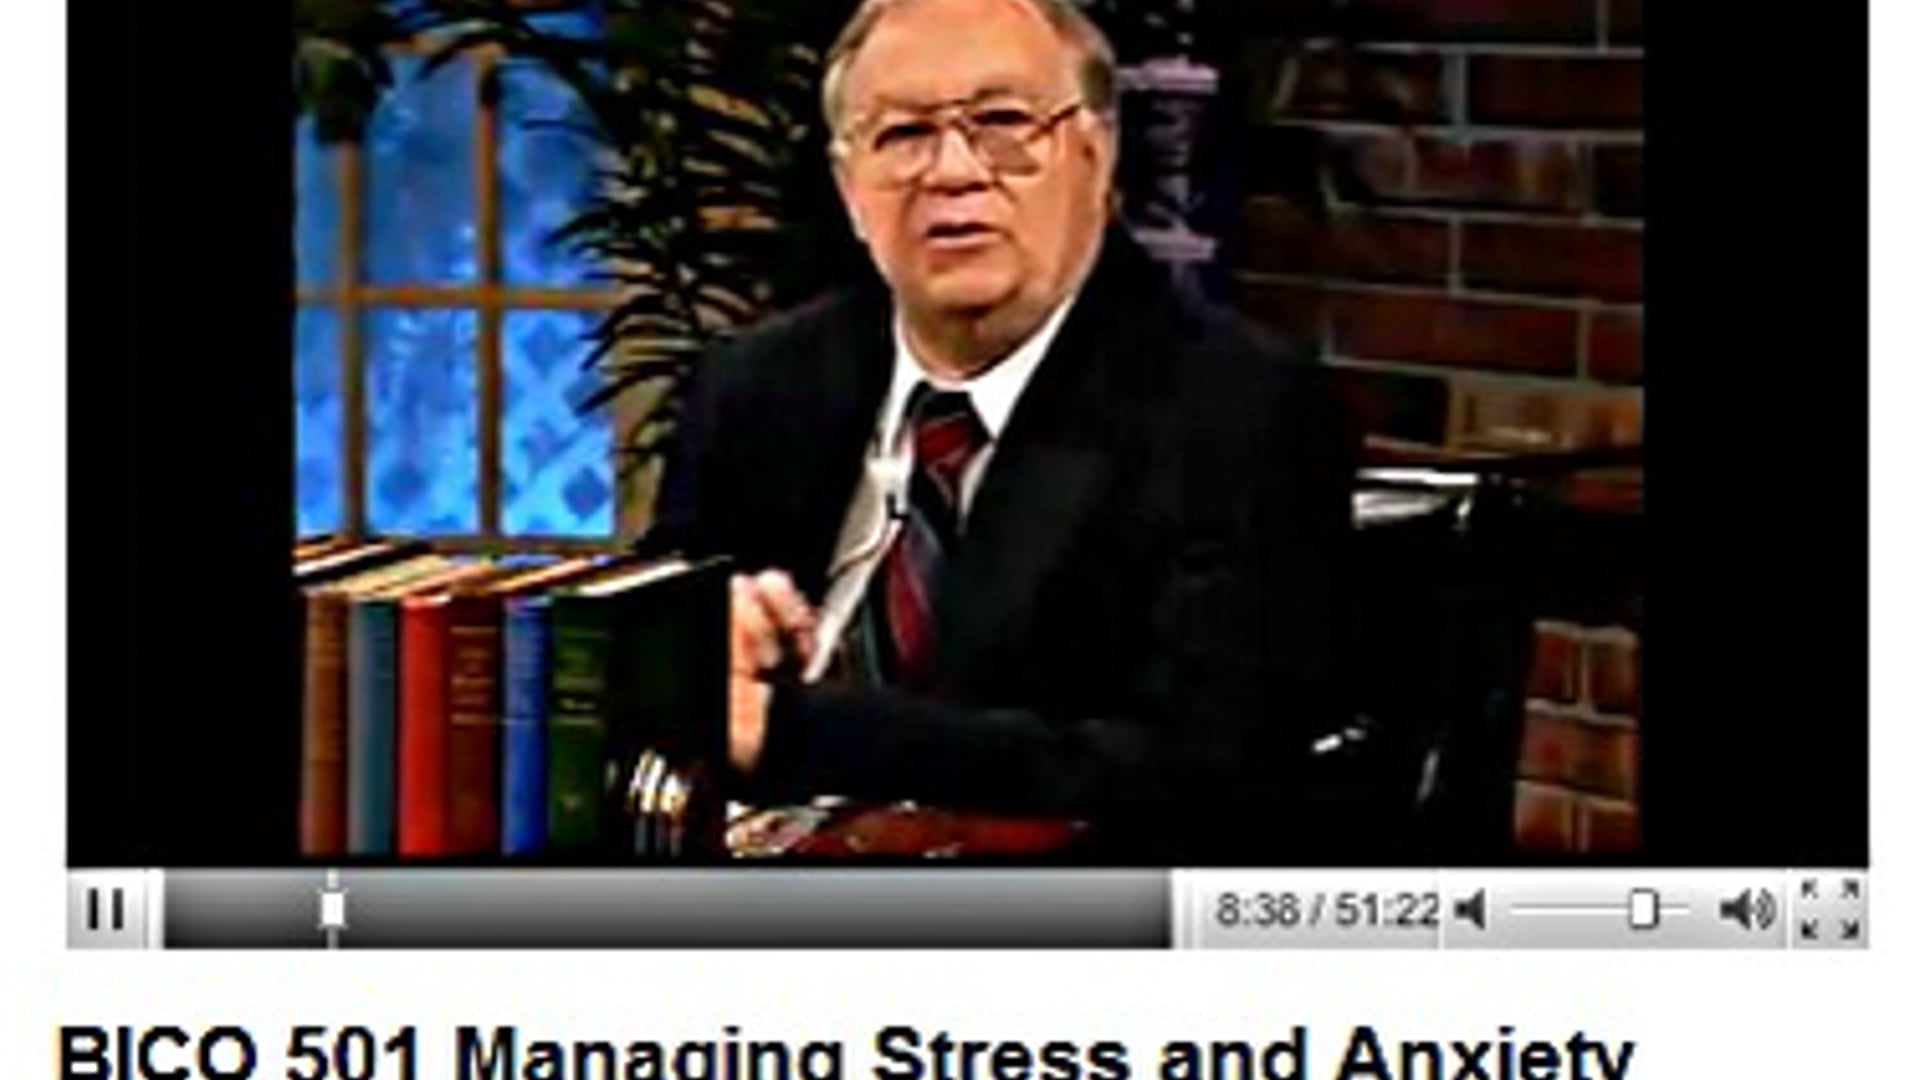 Managing Stress and Anxiety